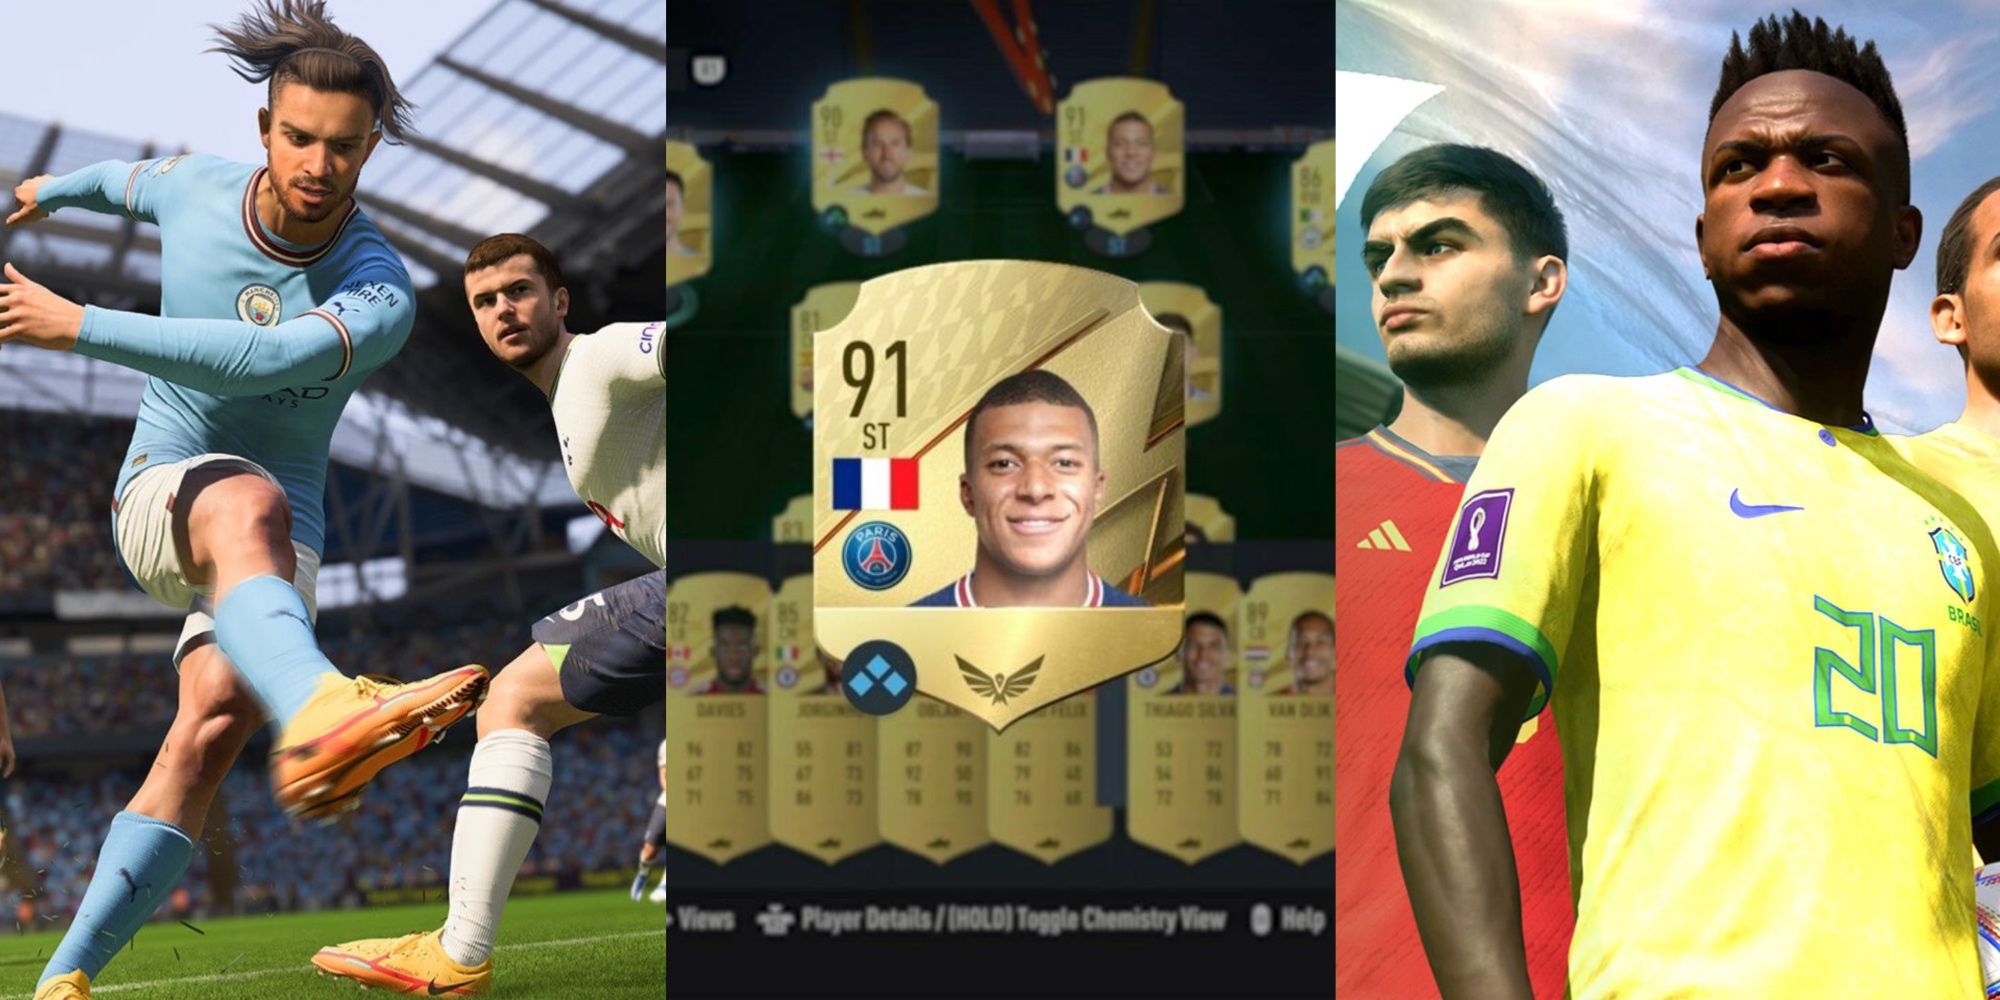 Jack Grealish strikes a ball in FIFA 23. Mbappe's gold card on a FUT team. Pedri and Vinicius pose next to each other.